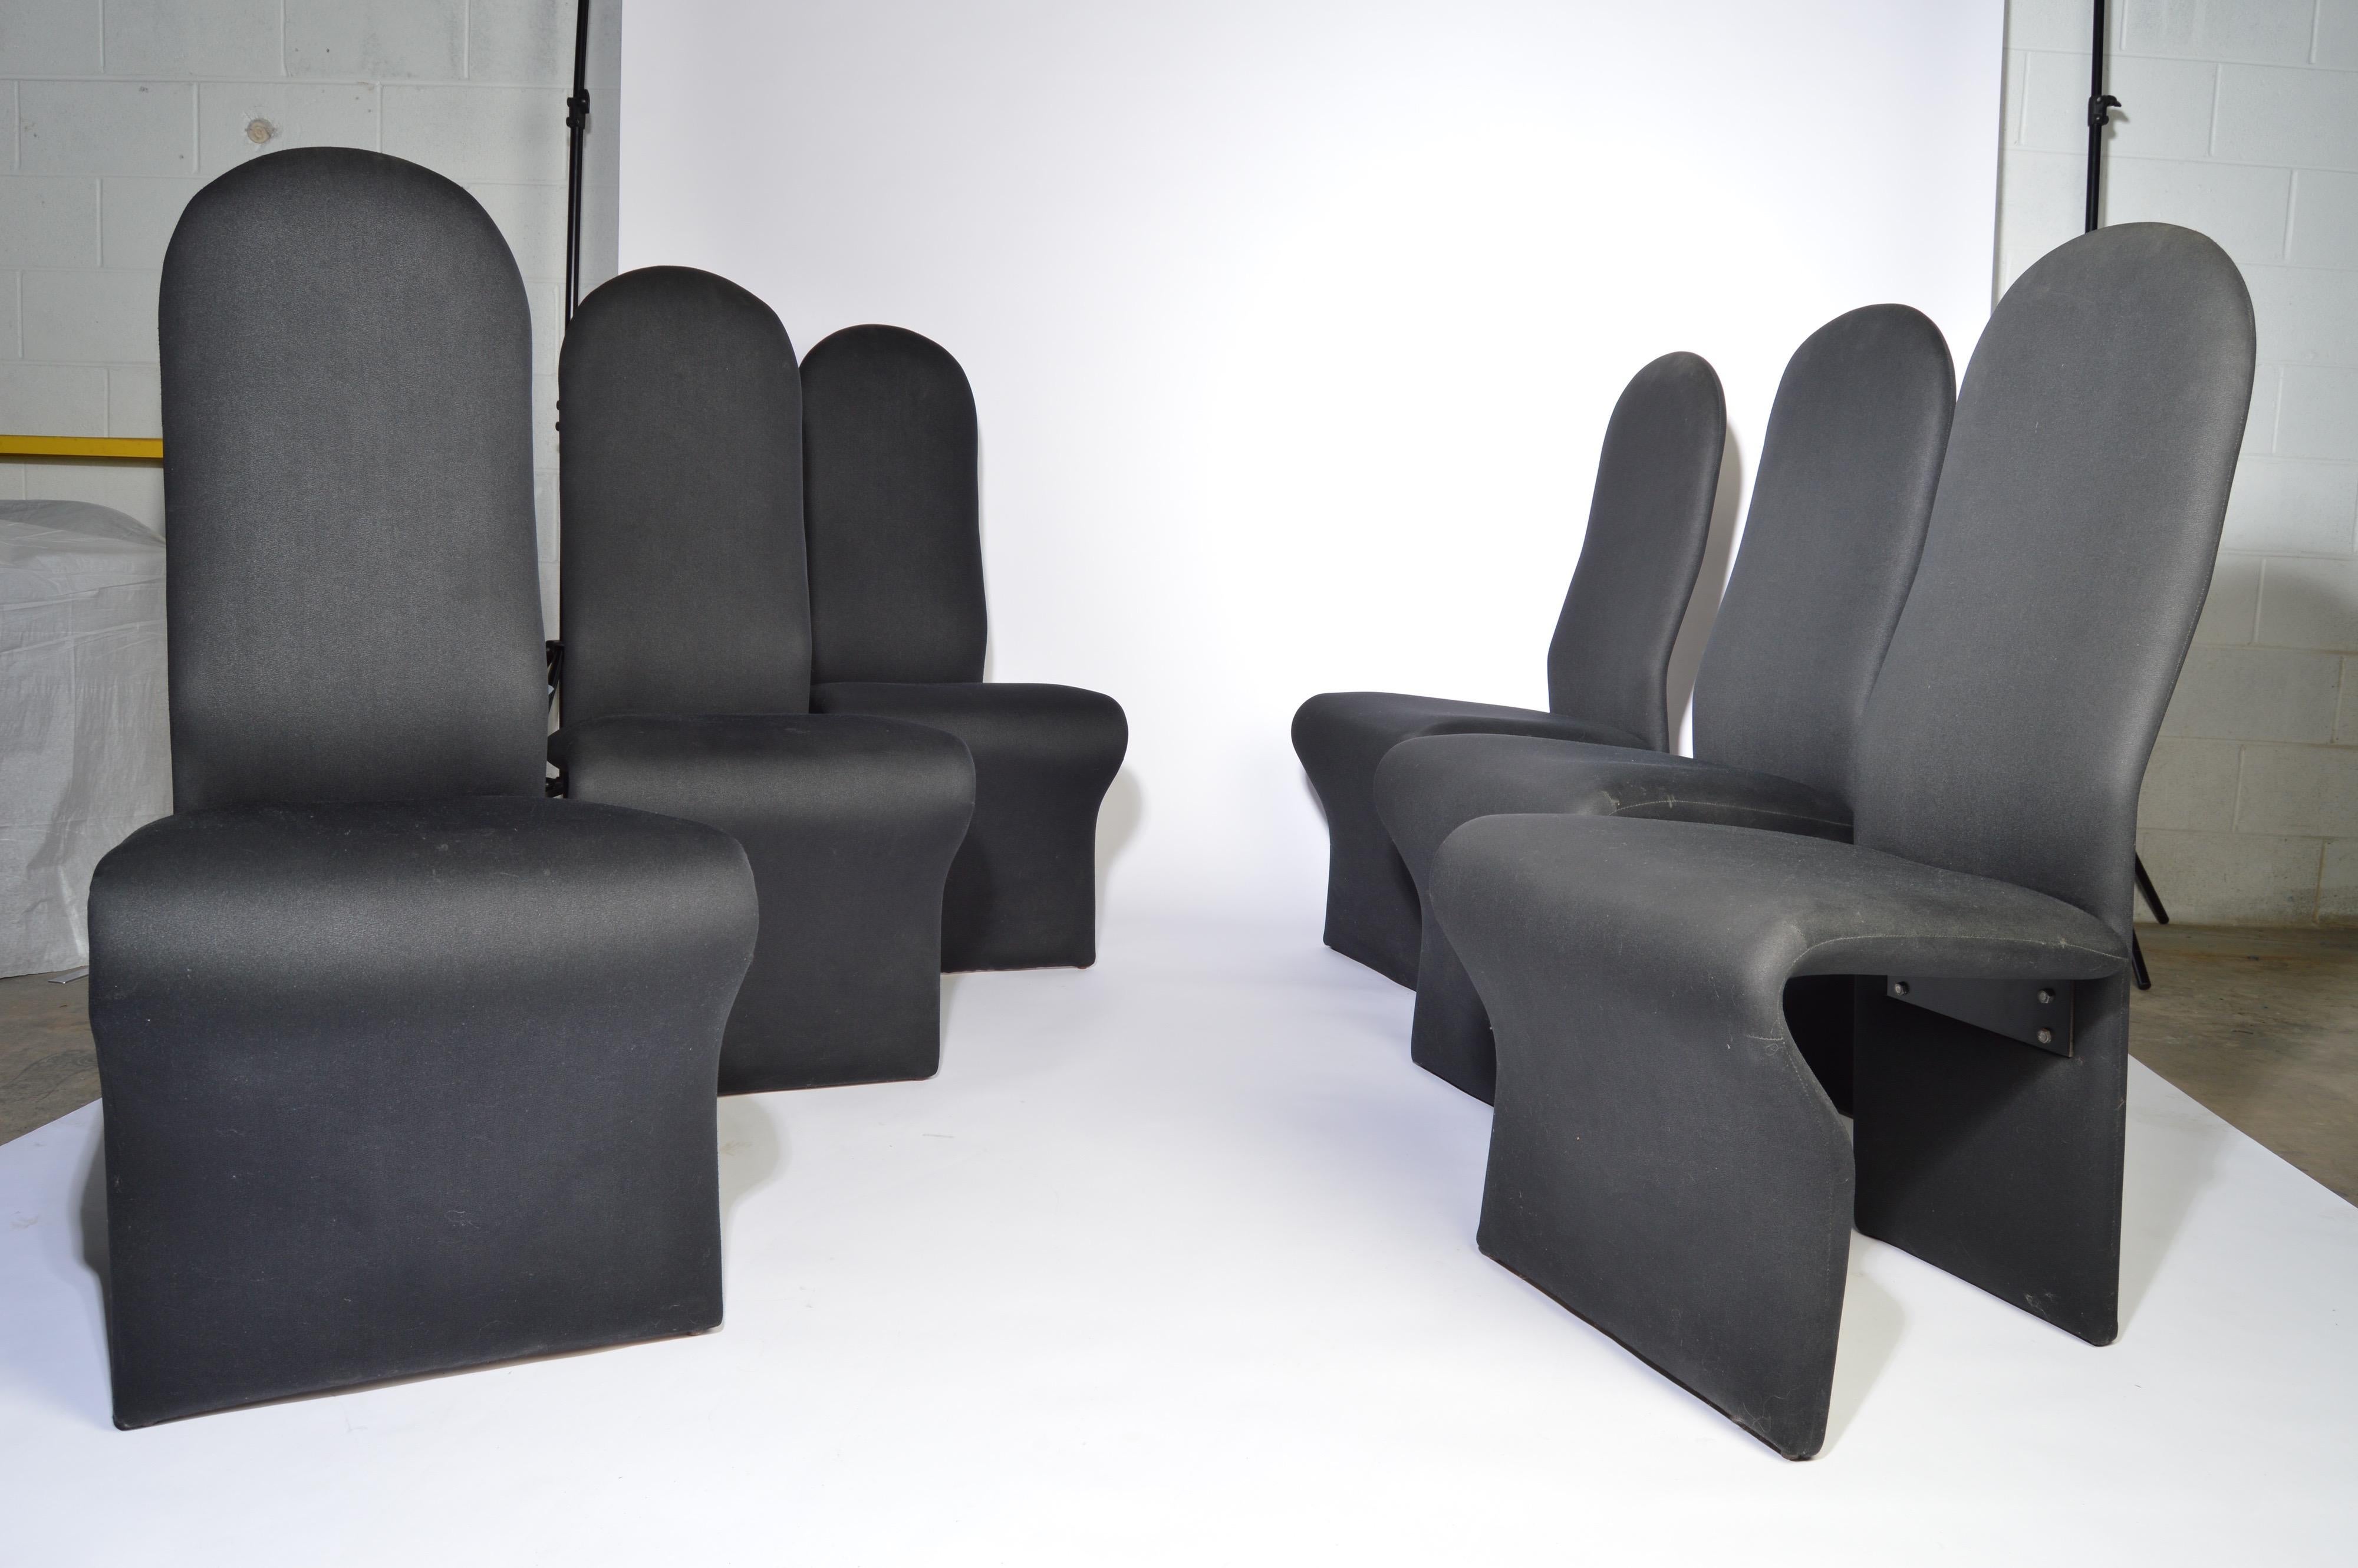 A set of 6 Postmodern contemporary high back dining chairs in the manner of Jan Ekselius, circa 1980.
Outstanding vintage condition having clean black upholstery and extremely sturdy construction. Ready for use!